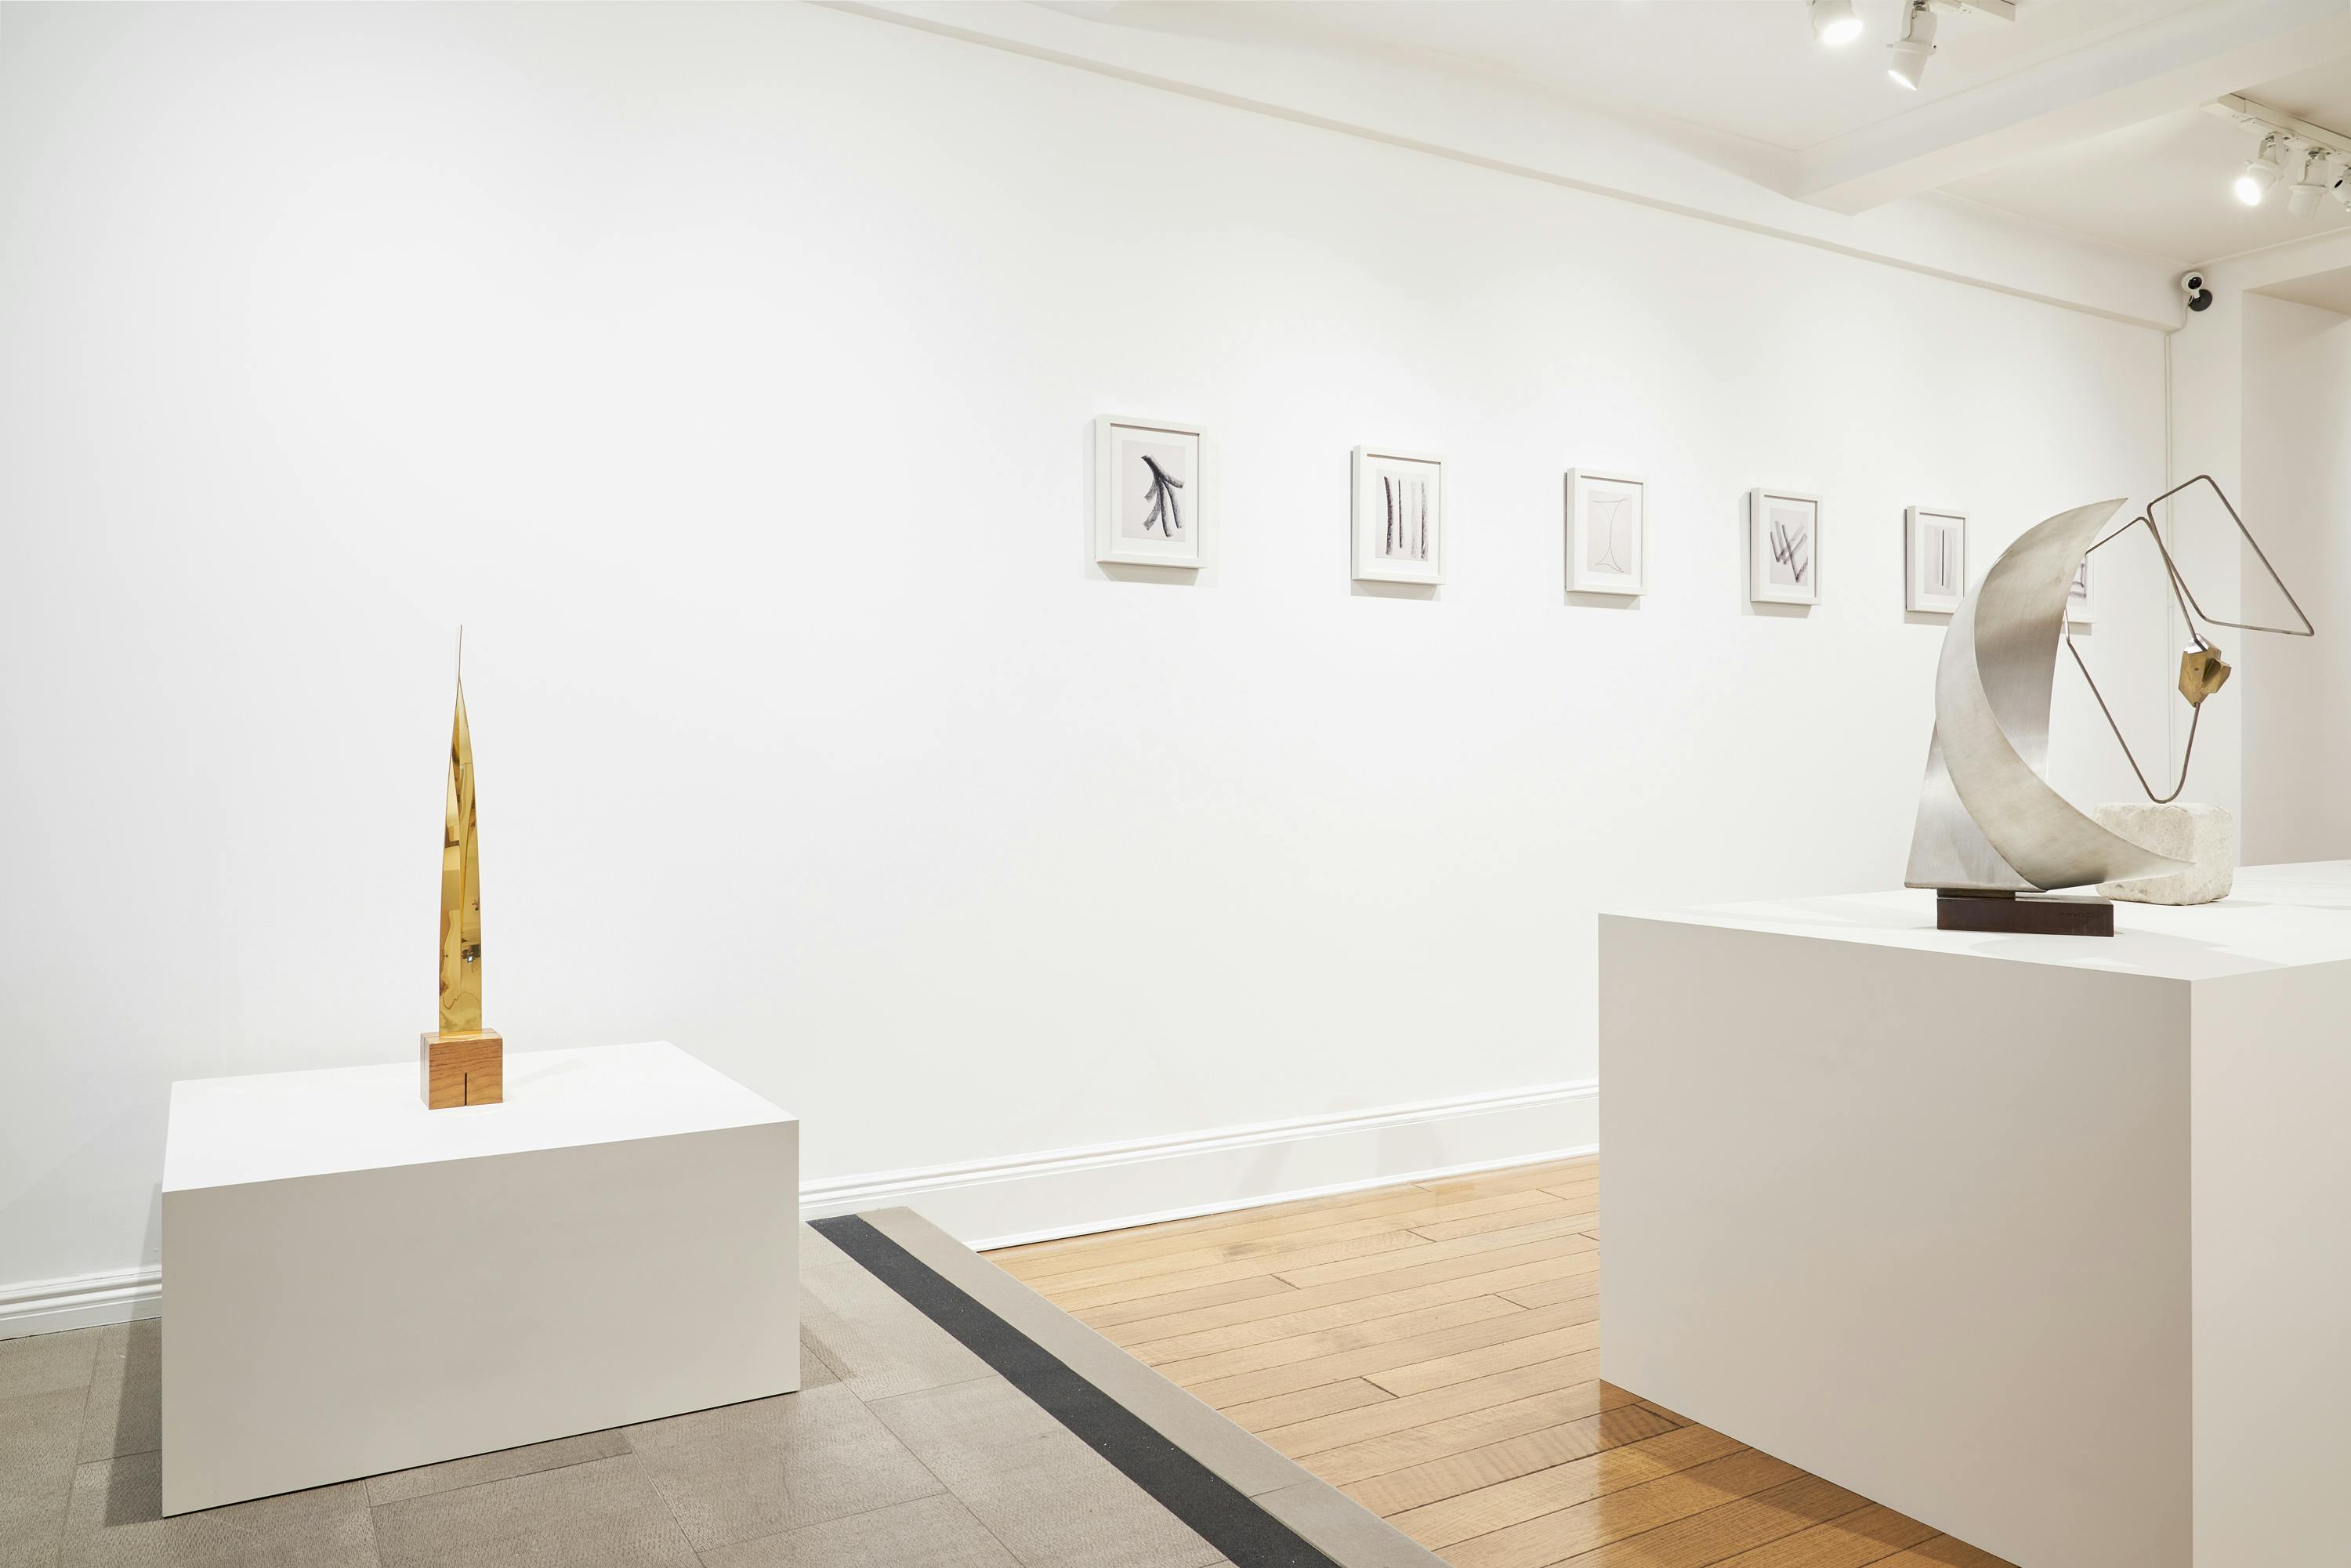 Gallery view of From Surface to Space exhibition showing three free-standing sculptures and five wall-mounted drawings.